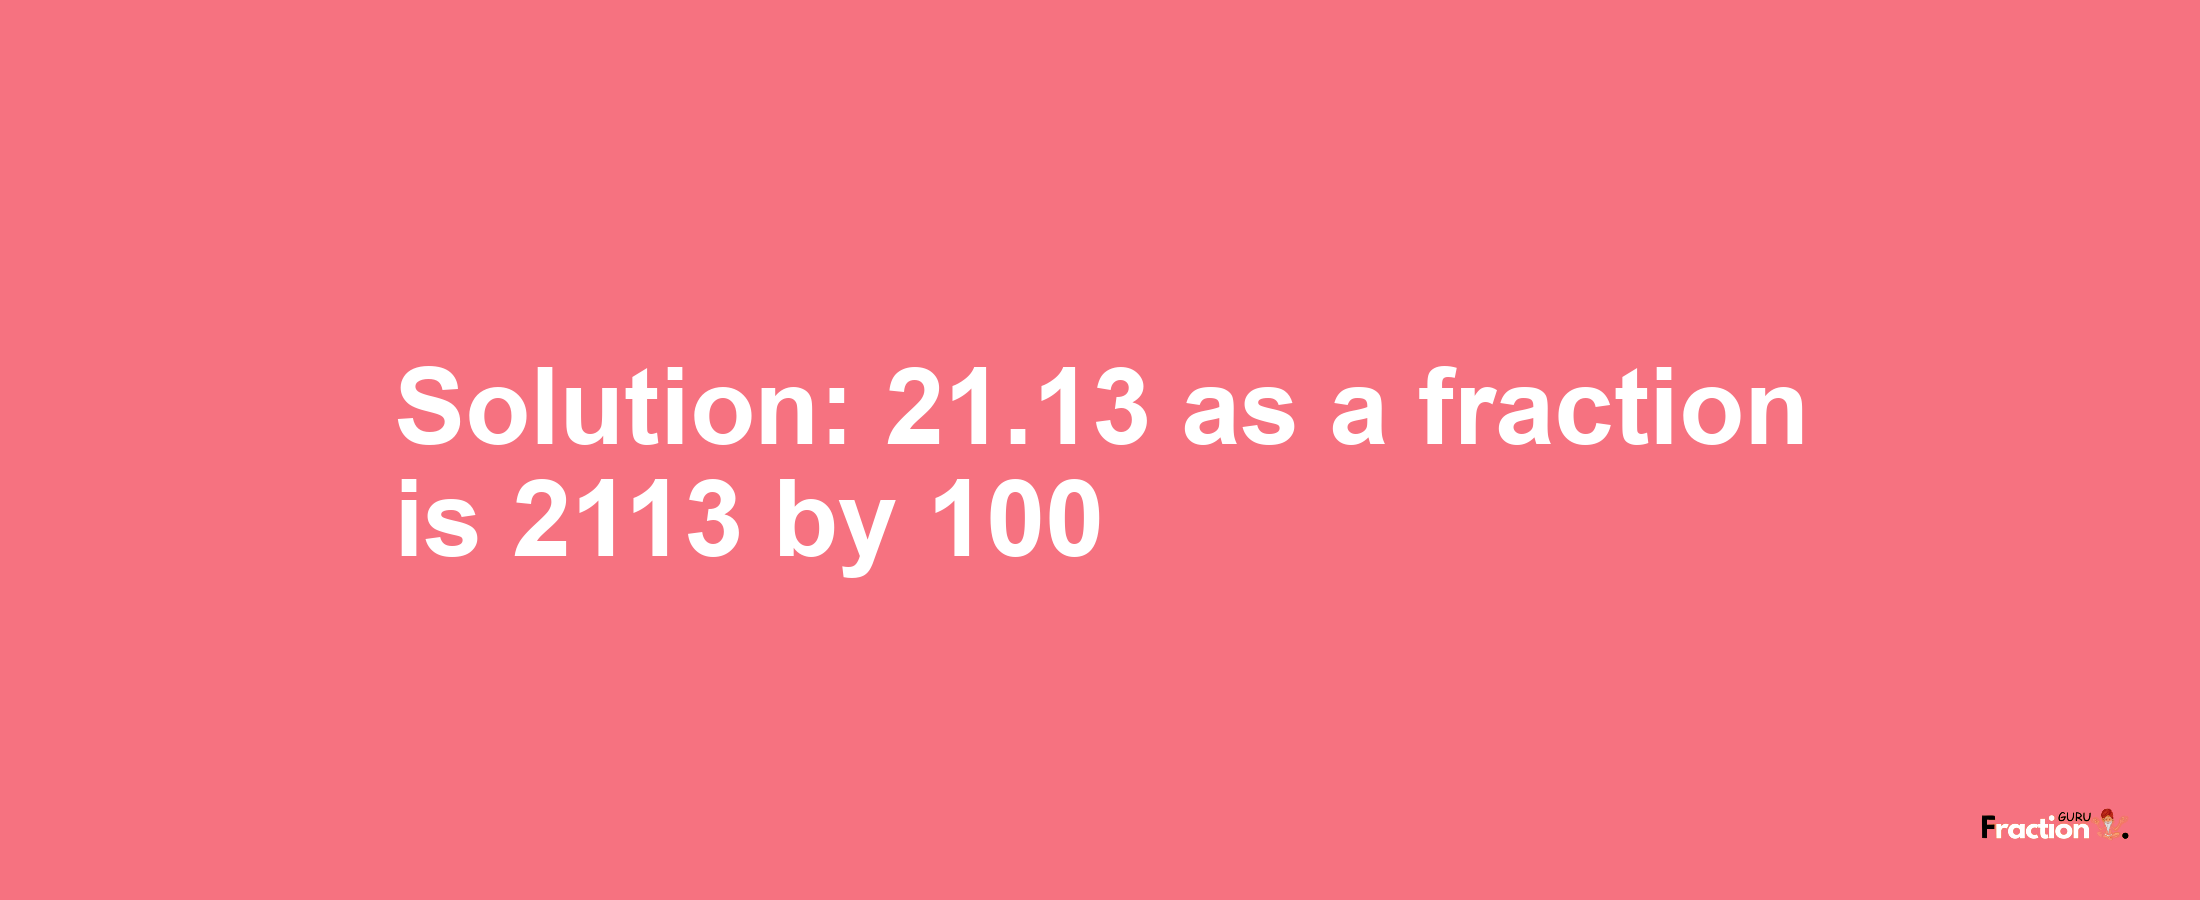 Solution:21.13 as a fraction is 2113/100